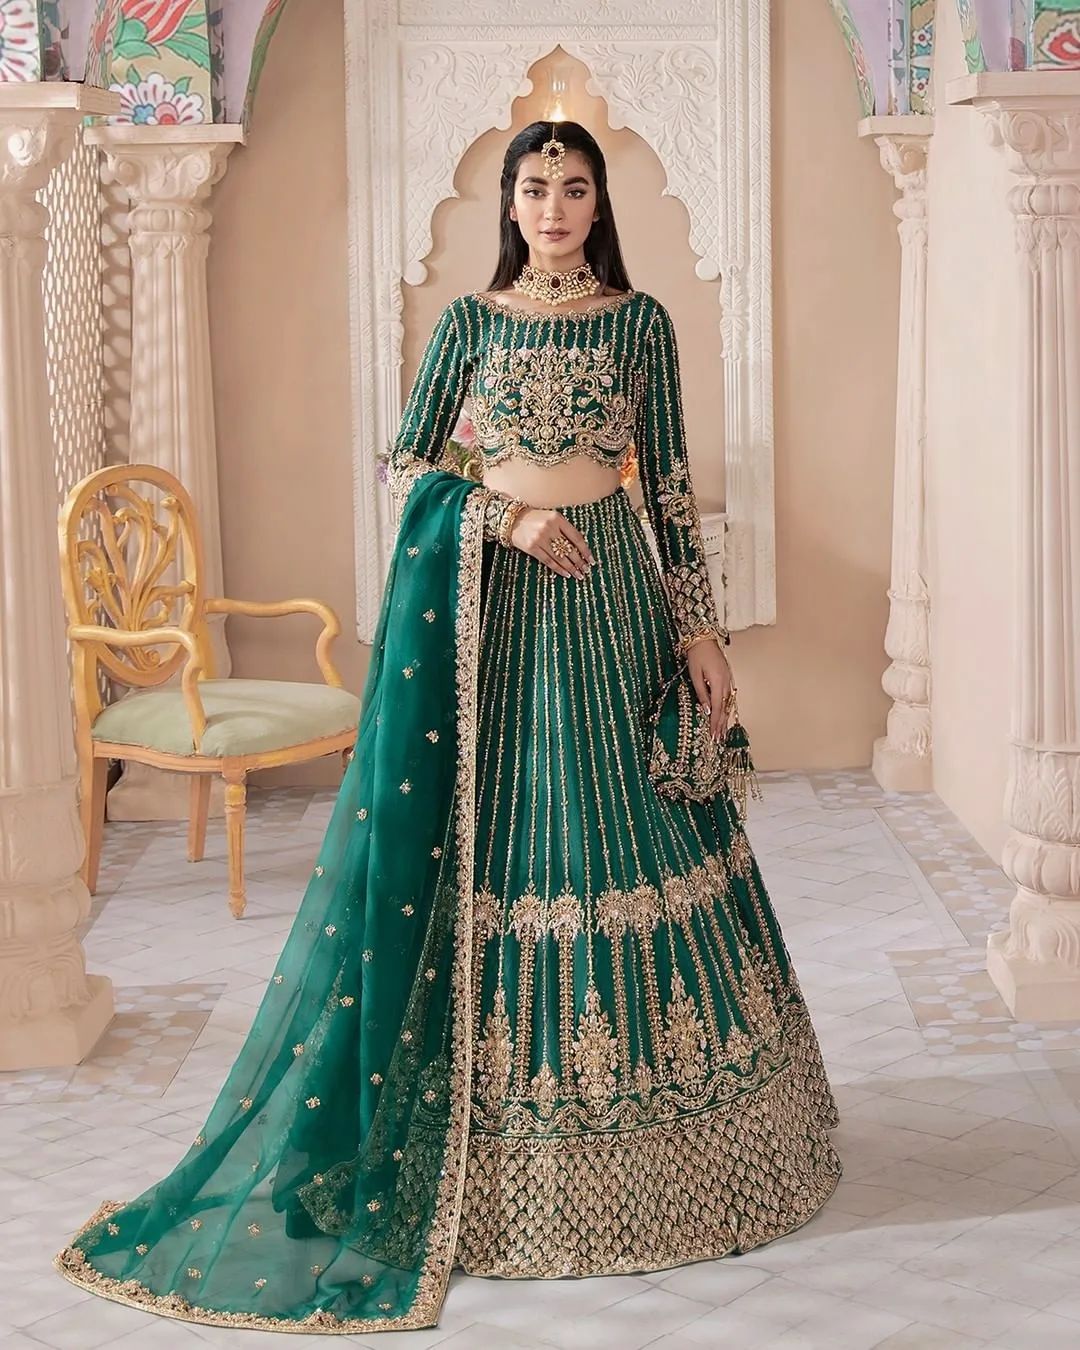 Bhumi Pednekar exudes regal vibes in a stunning olive green and golden  lehenga | Times of India